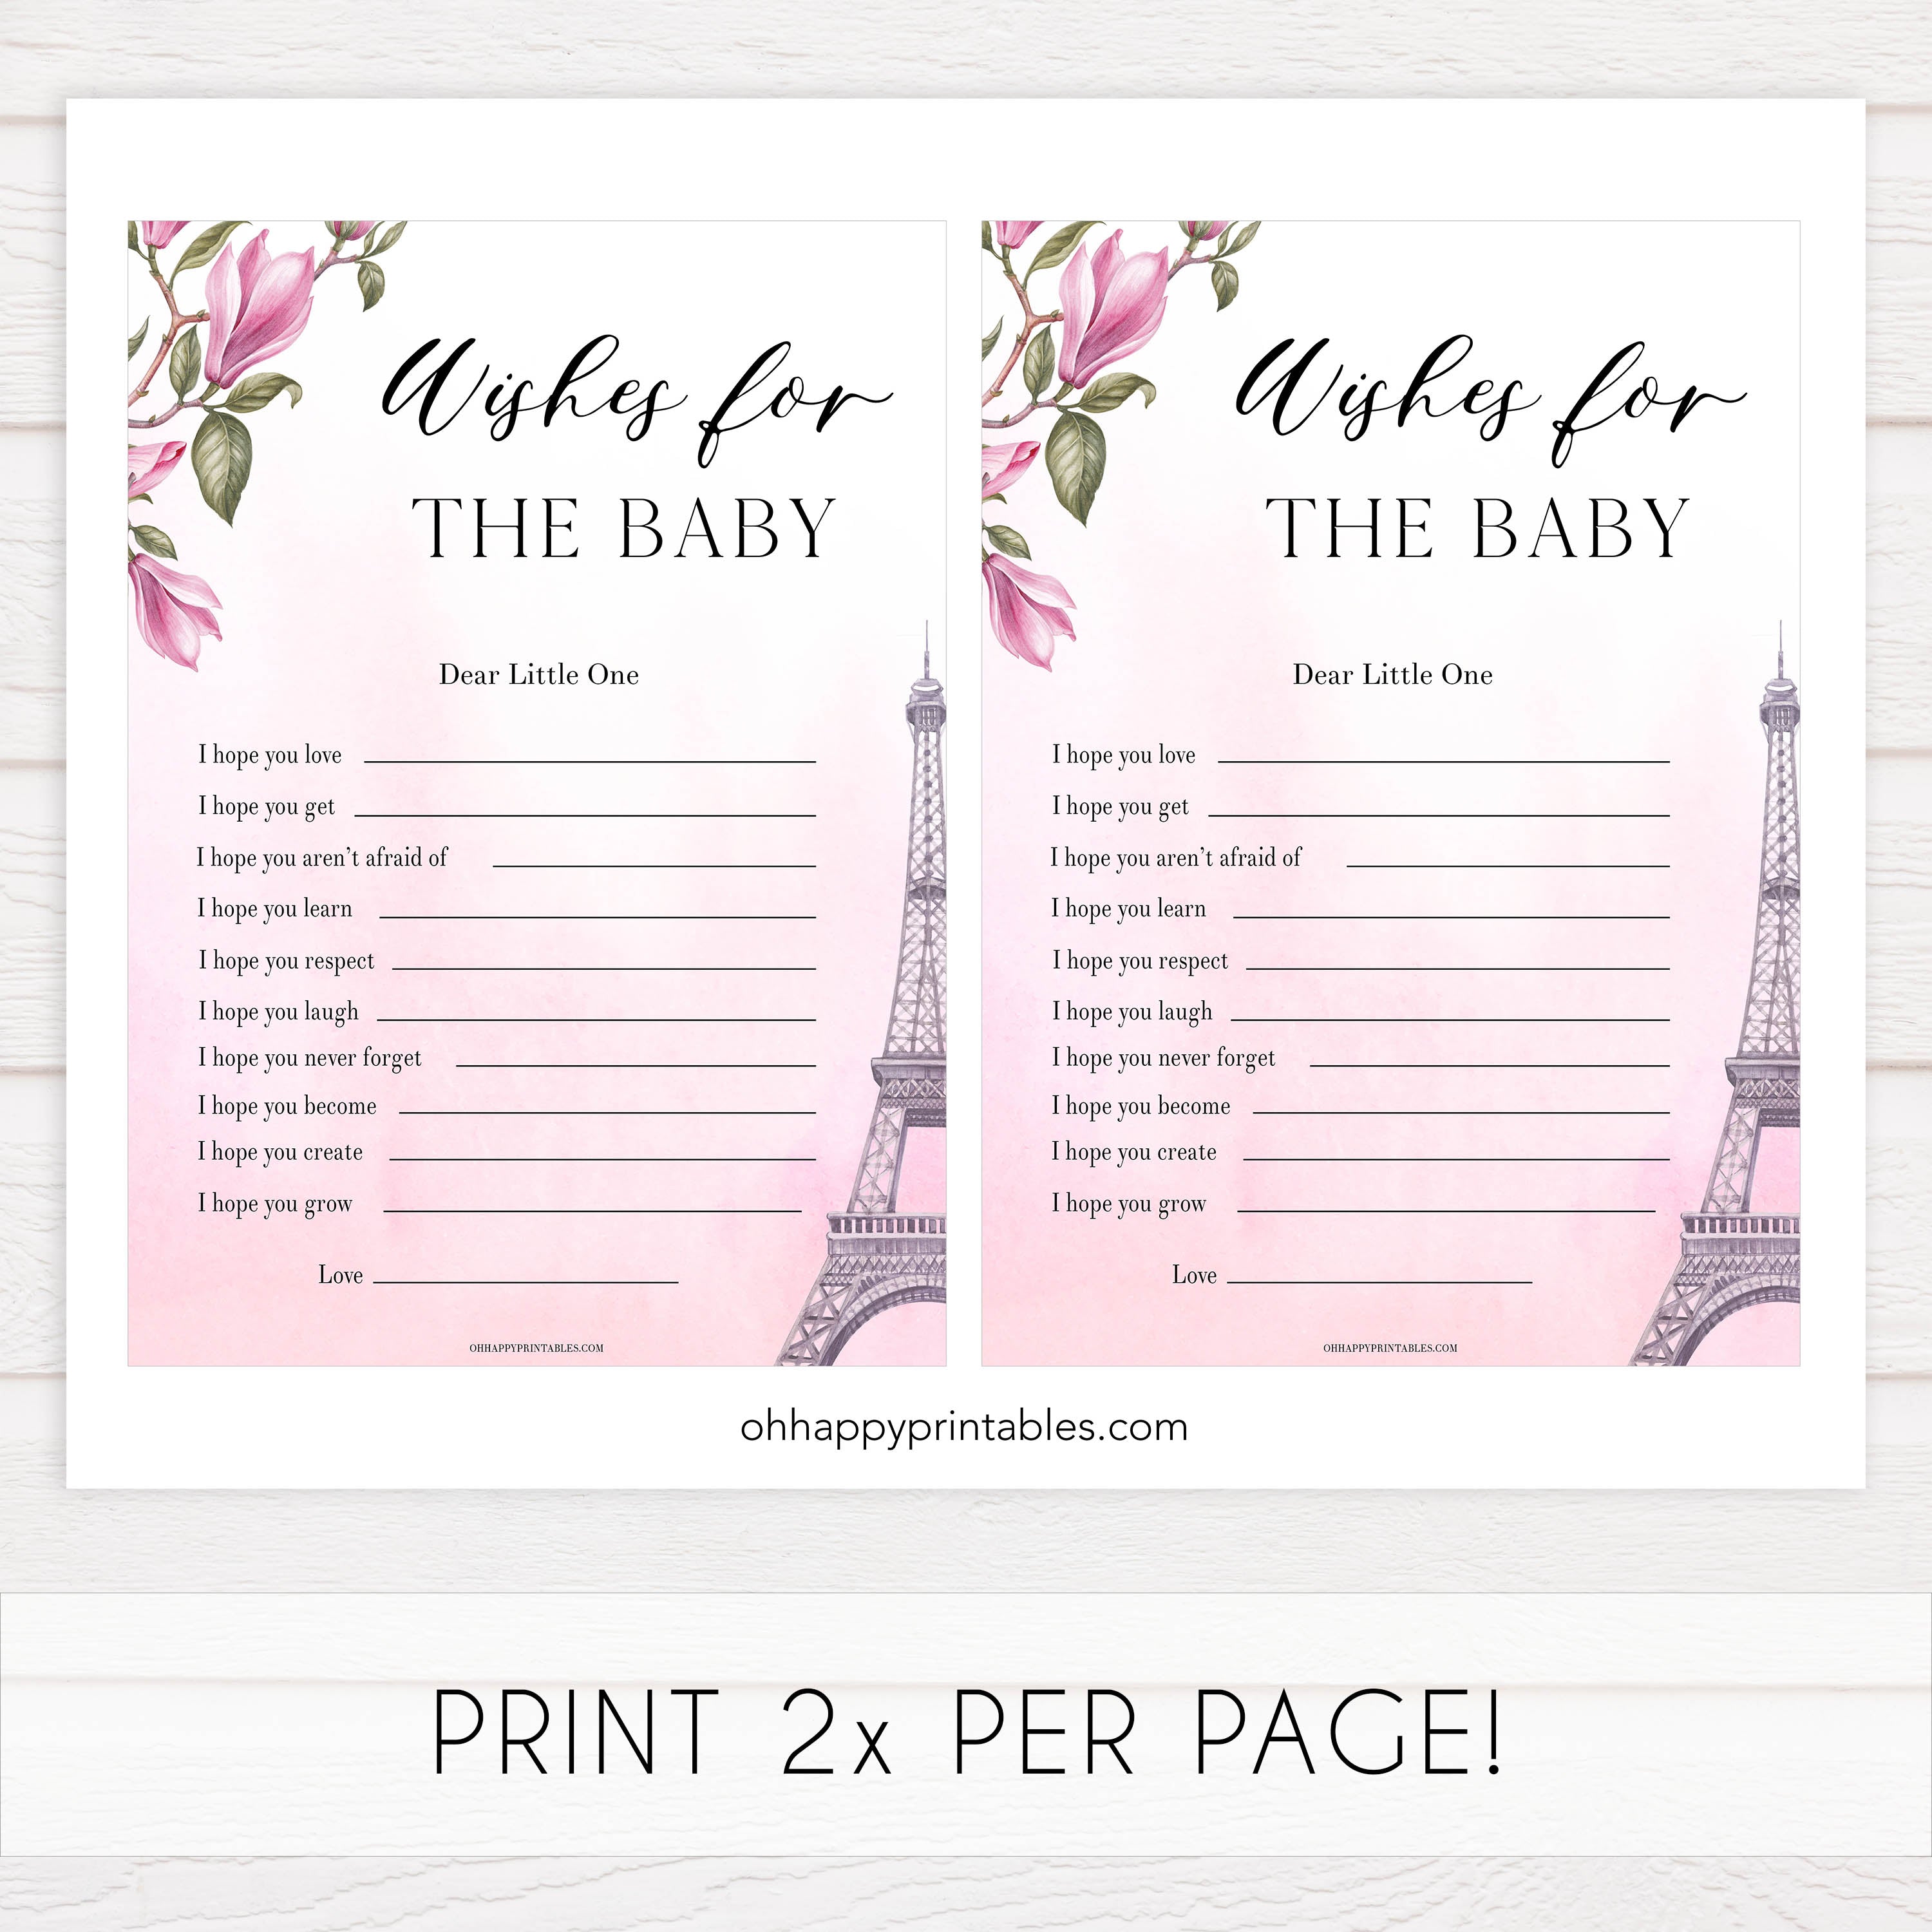 wishes for the baby keepsake, Paris baby shower games, printable baby shower games, Parisian baby shower games, fun baby shower games